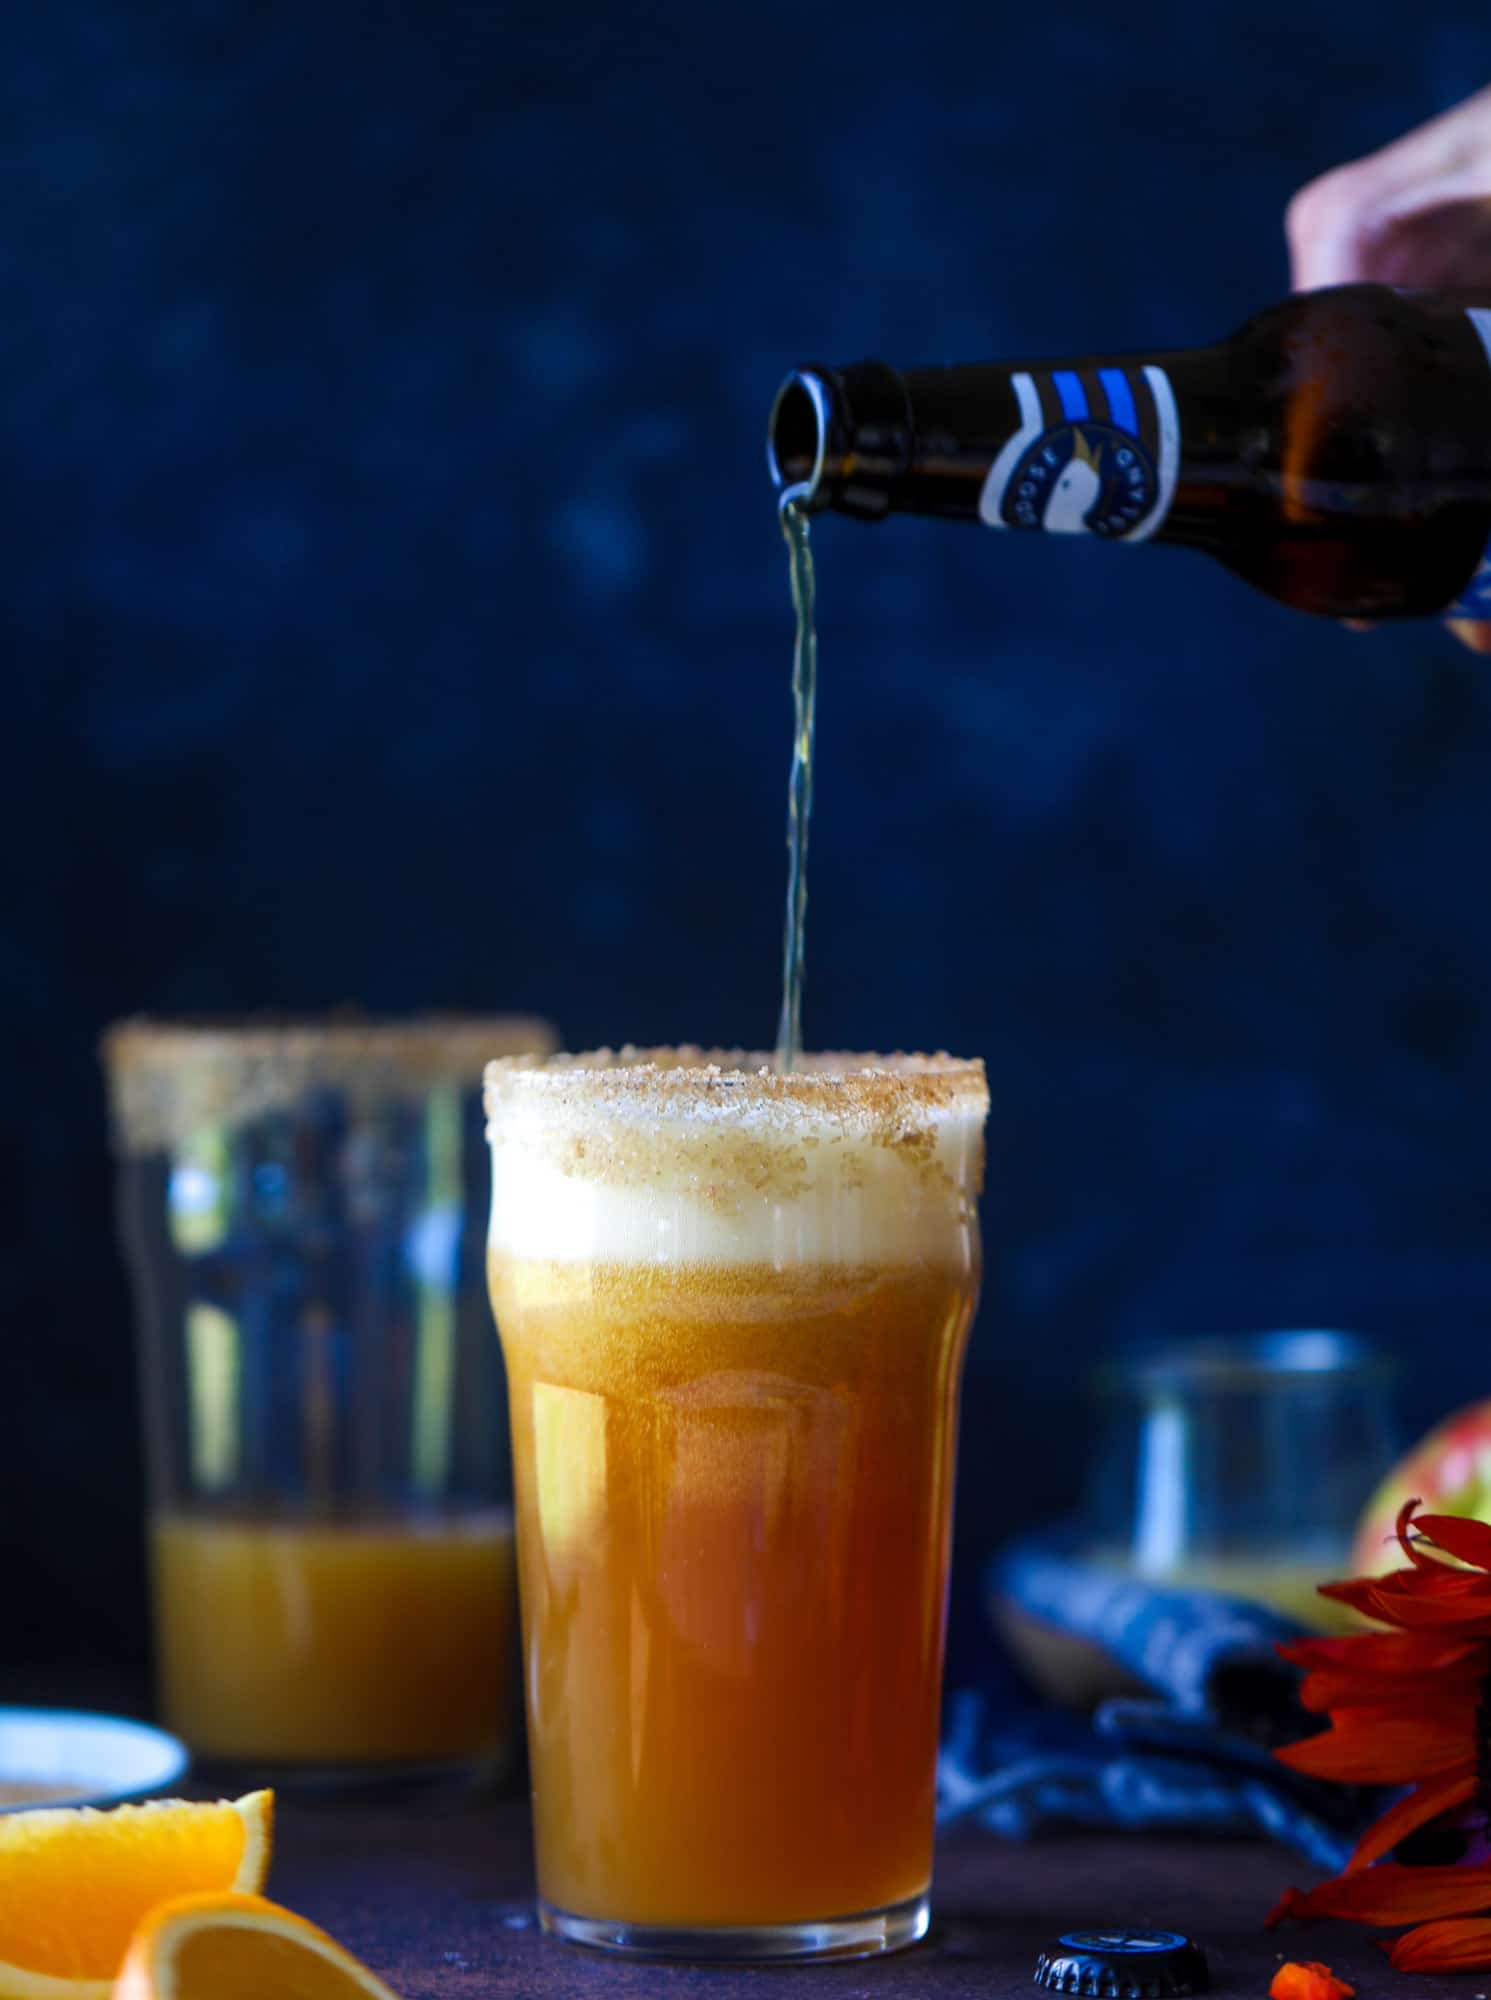 This apple cider shandy recipes is perfect for the fall season! Apple cider, sparkling cider and your favorite beer come together in an icy glass to create the best flavor ever. Finished with a cinnamon sugar rim, there's nothing better! I howsweeteats.com #apple #cider #shandy #cocktails #beer